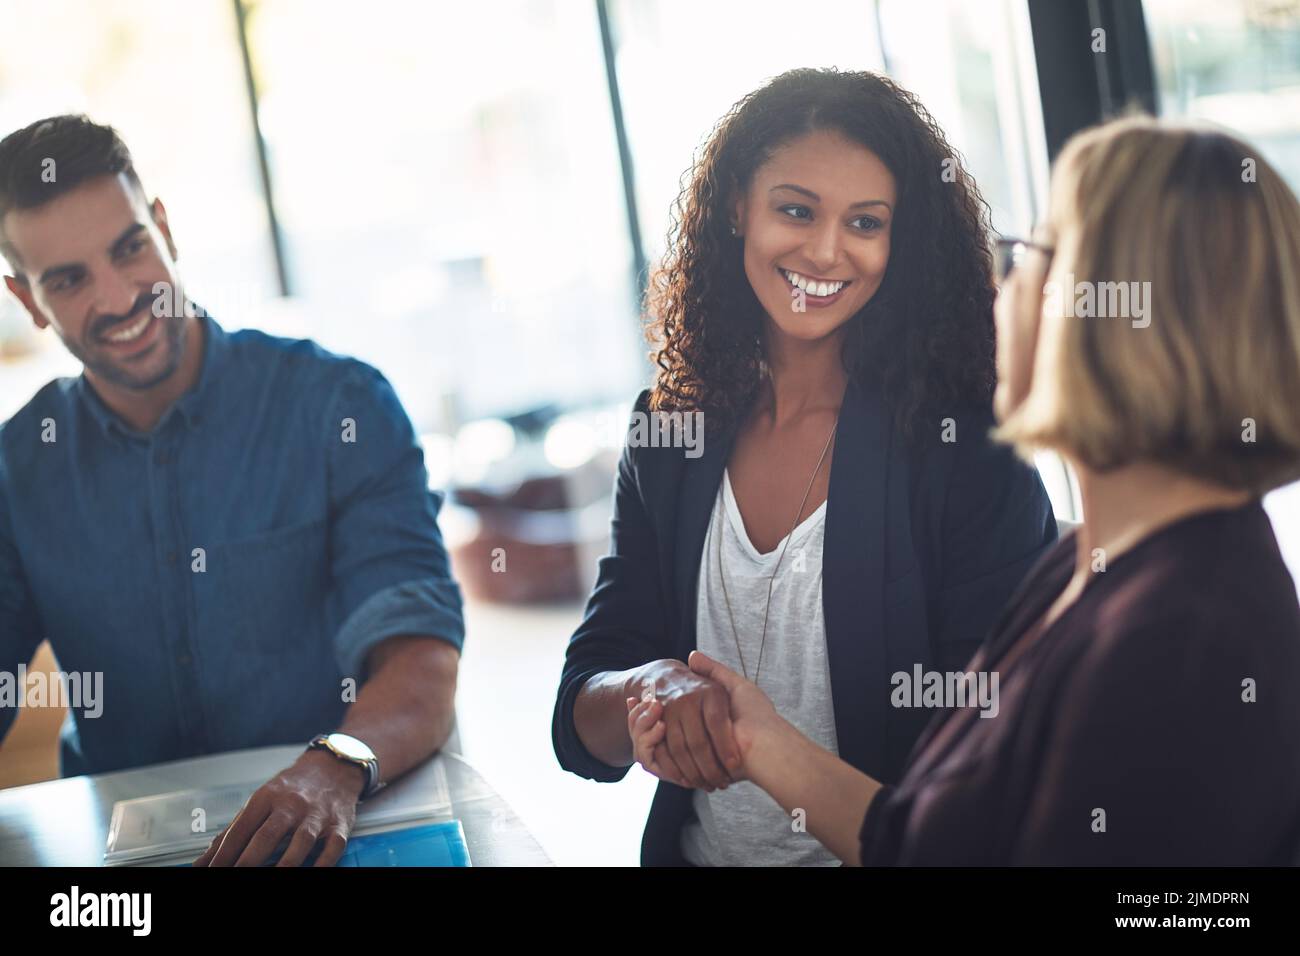 Handshake by businesswomen to congratulate in a meeting at work. Business professionals greet and make deals to collaborate in a corporate office Stock Photo